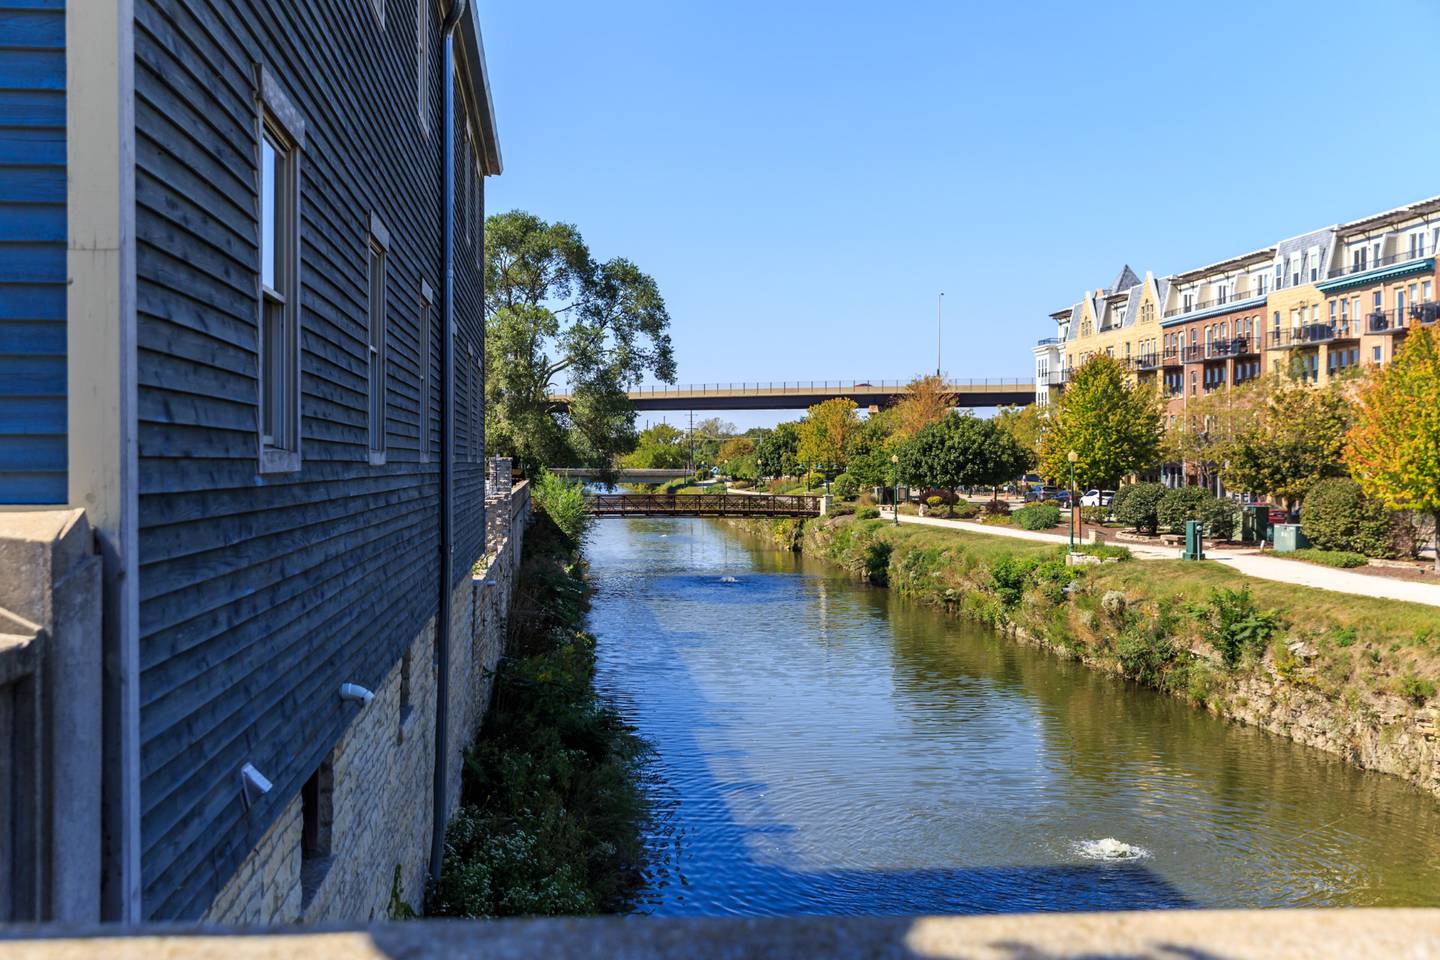 The village of Lemont is celebrating its 150th anniversary this week, with the culmination of the celebration on Friday and Saturday. Pictured is the I&M Canal in Lemont.